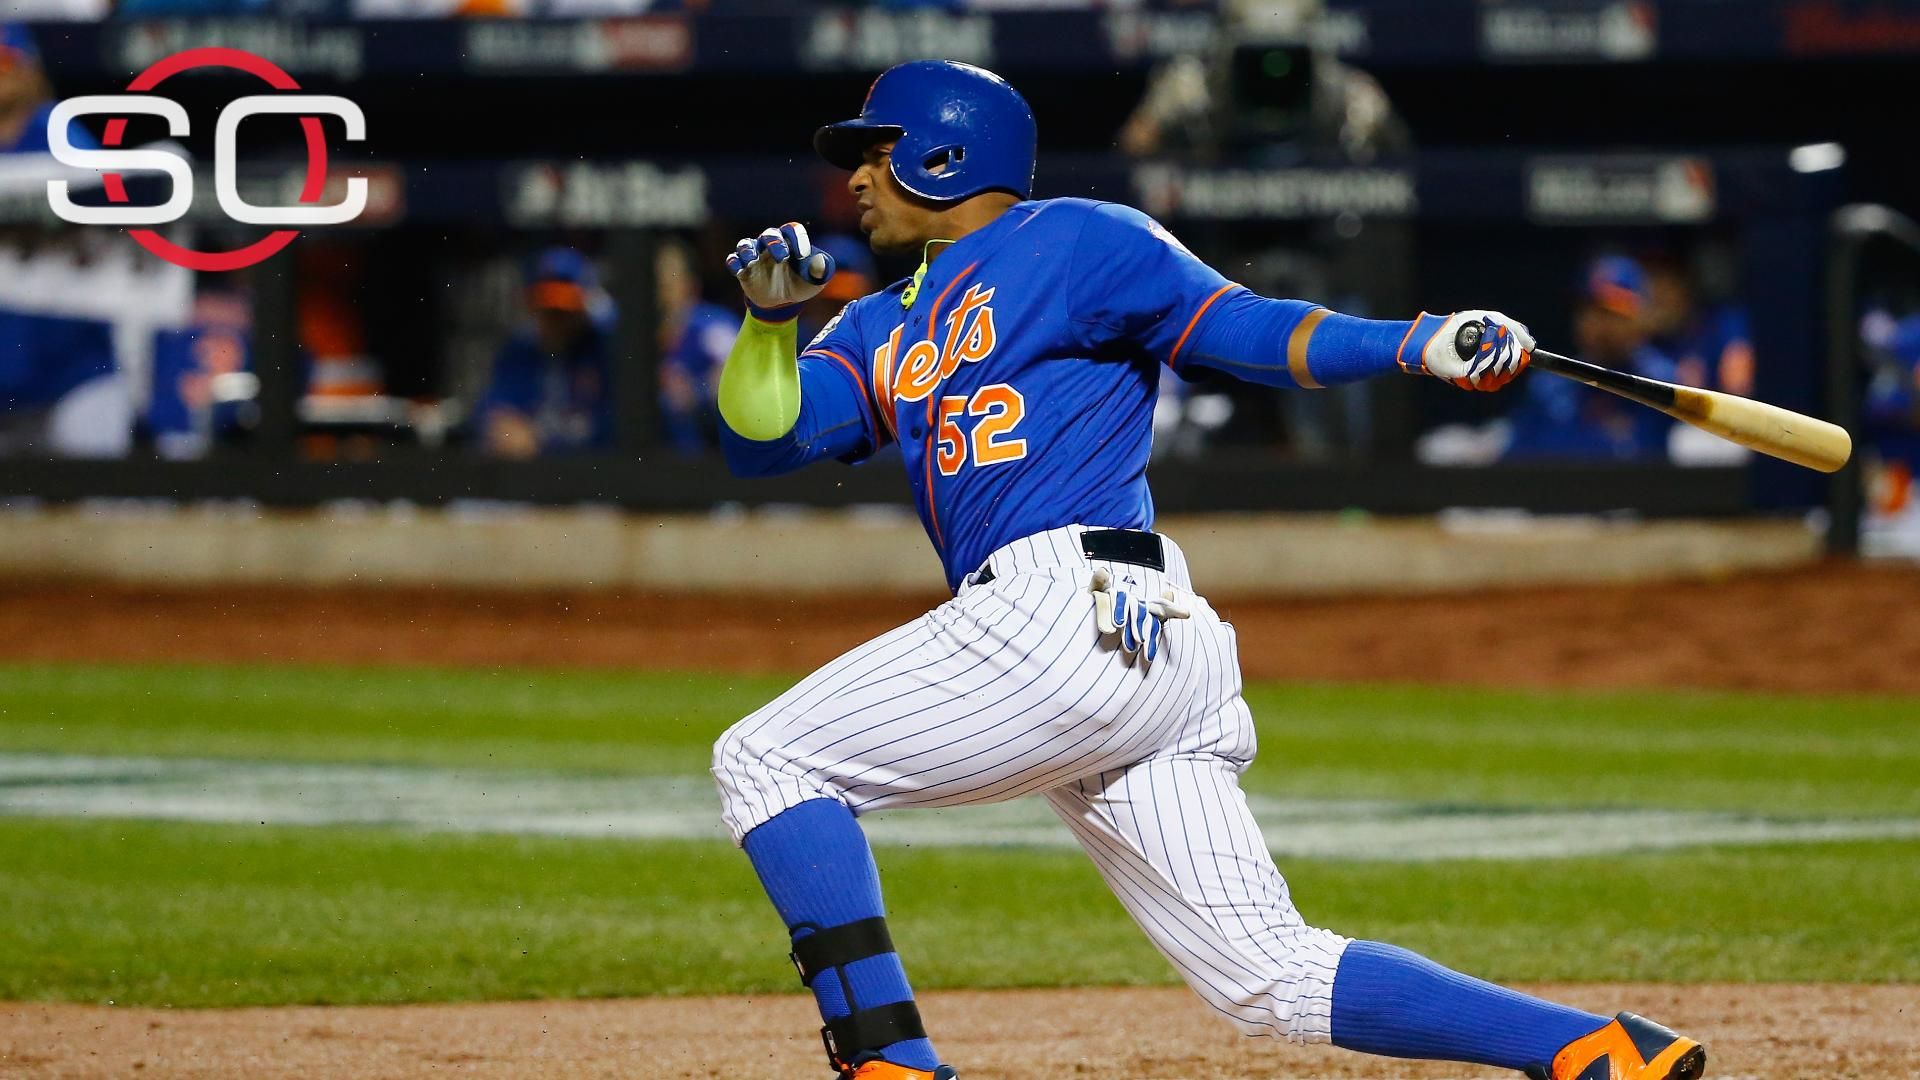 Can Mets keep Cespedes away from Nats?